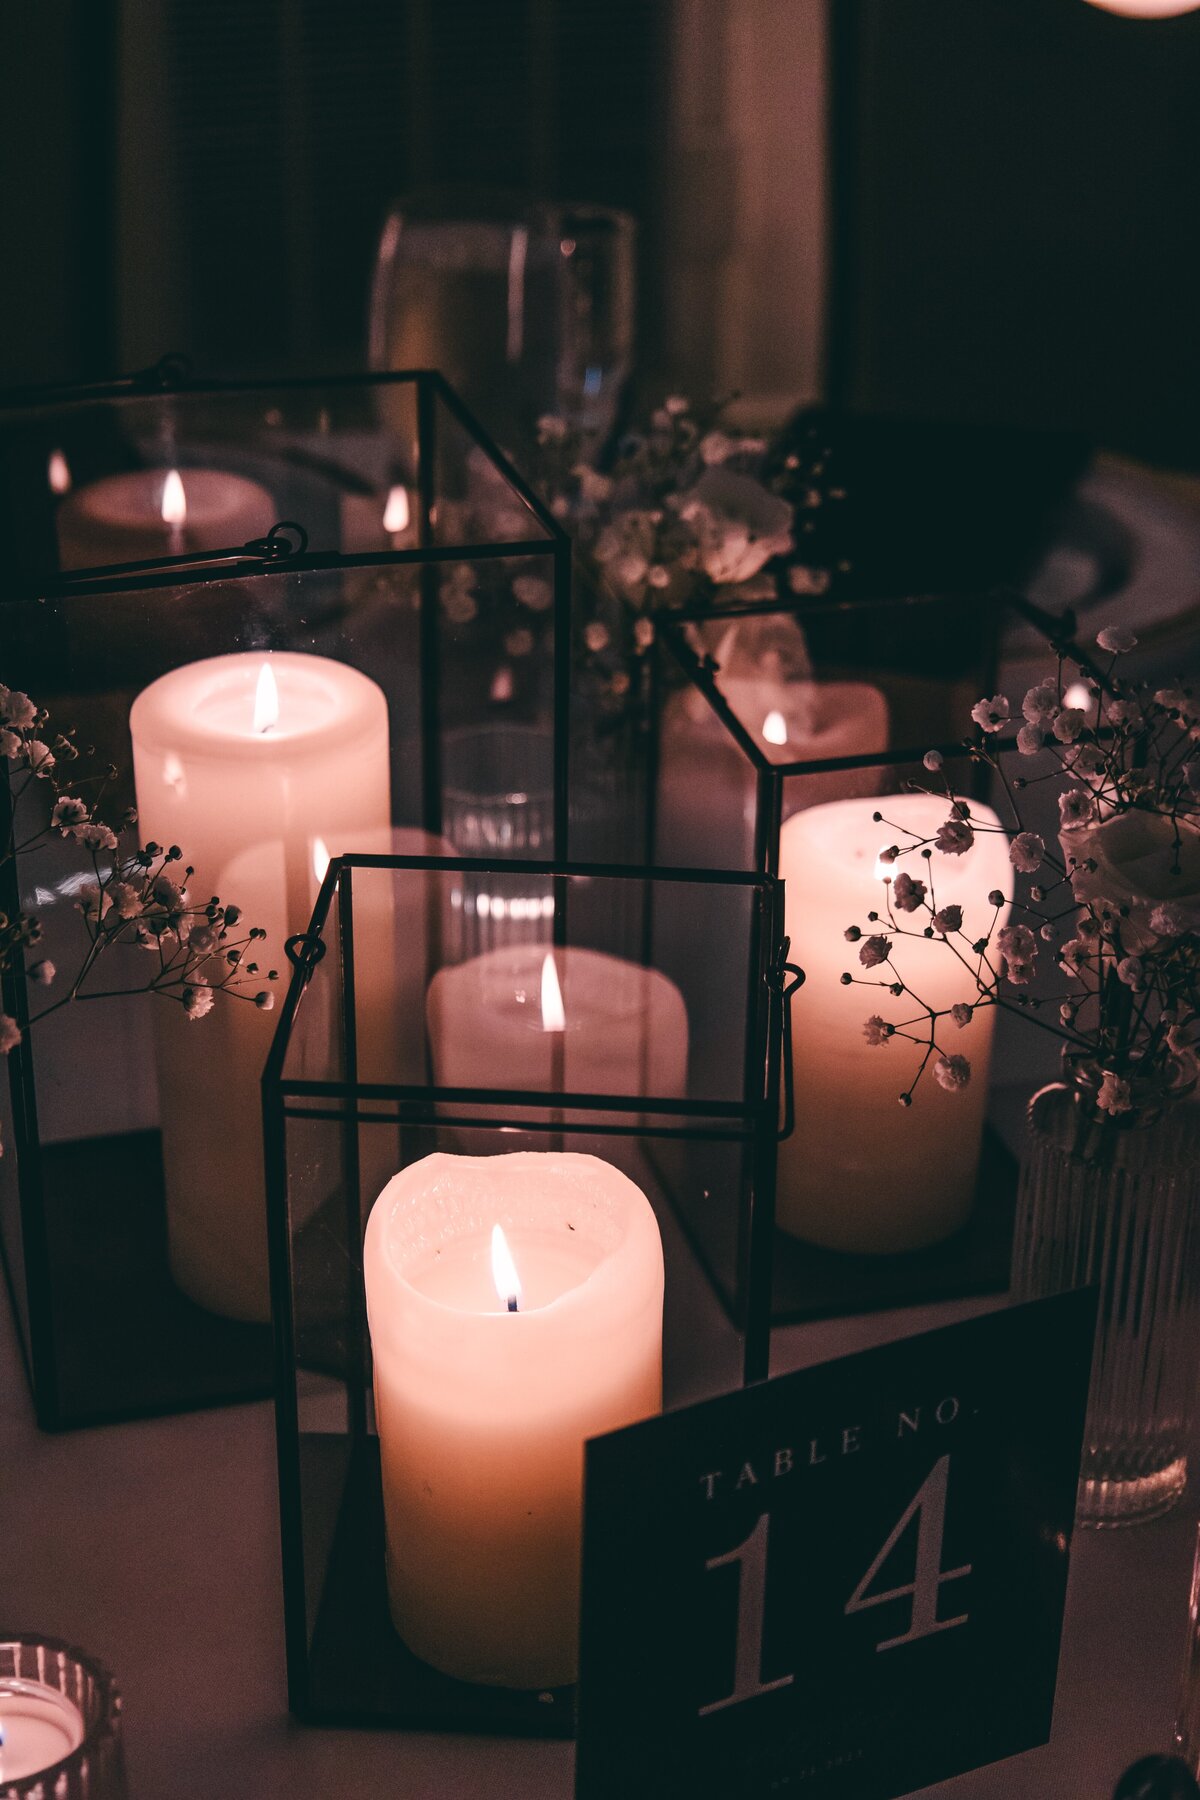 Elegant table setting featuring lit candles in glass holders, floral accents, and a "table no. 14" sign on a dimly lit background, perfect for events in Davenport.